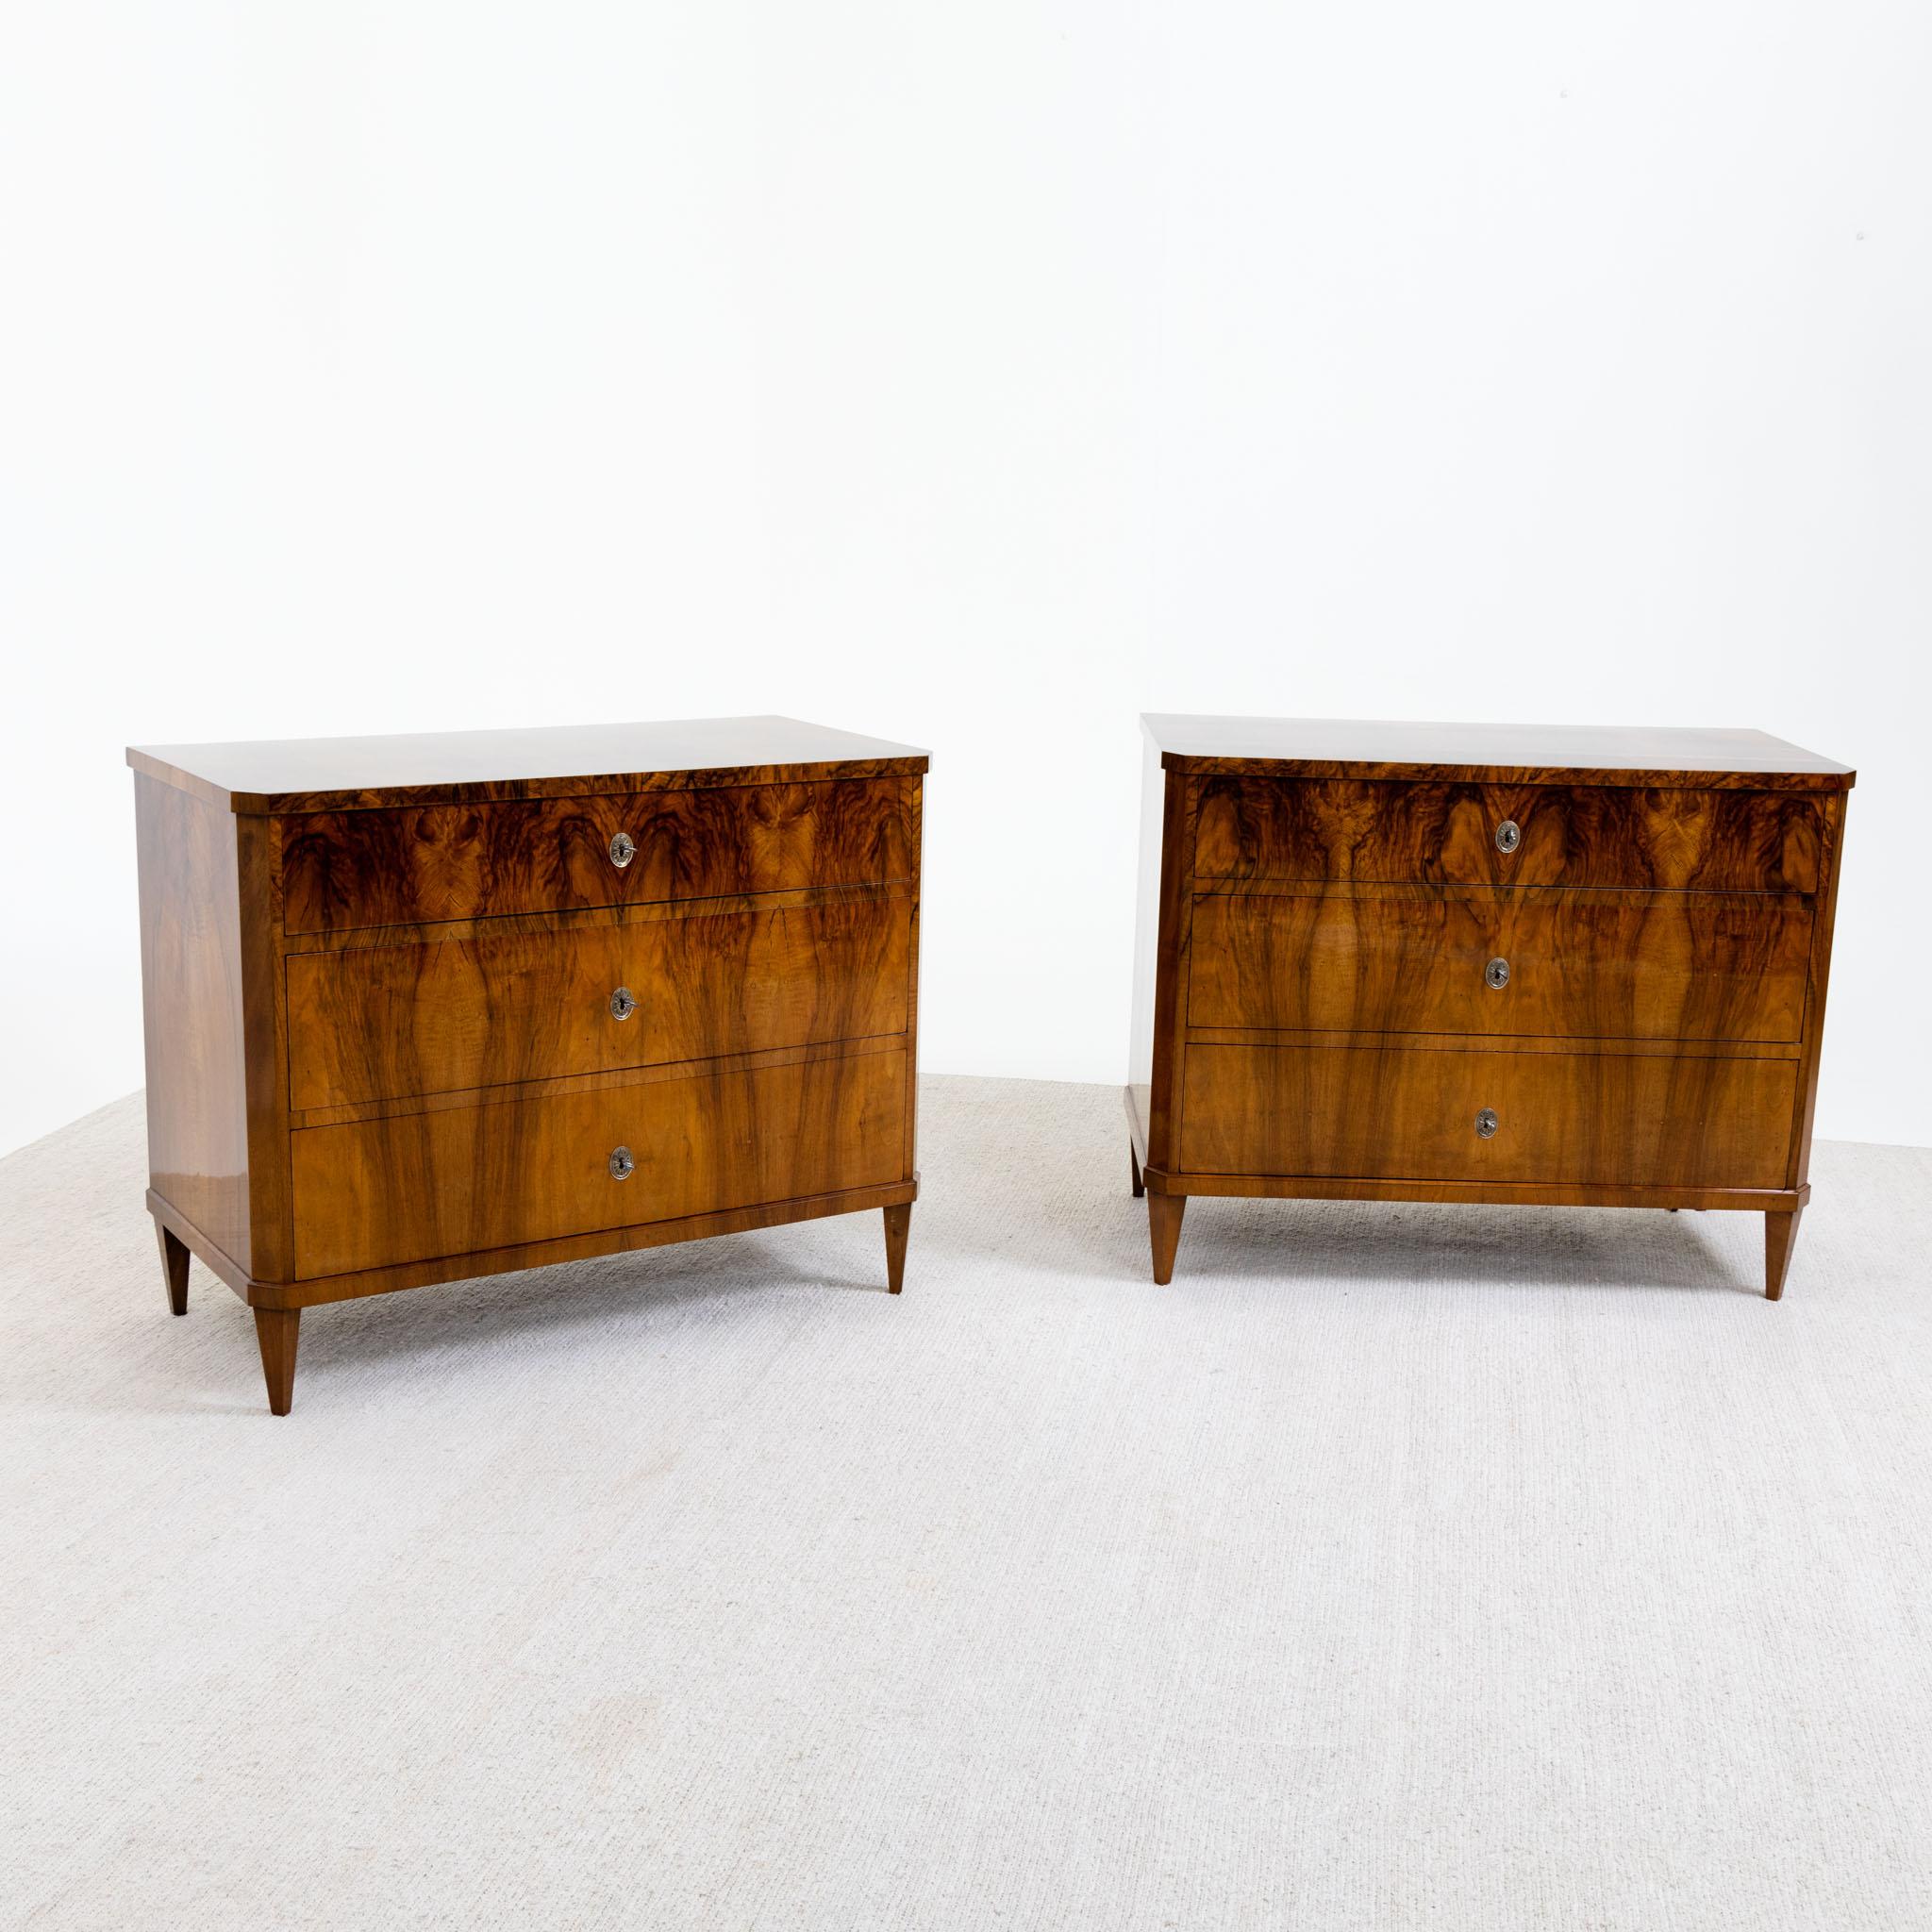 Pair of Italian Biedermeier chests of drawers featuring three drawers each, standing on square pointed legs. The bodies, with beveled corners, are veneered in walnut and meticulously hand-polished. The drawers are adorned with brass escutcheons,